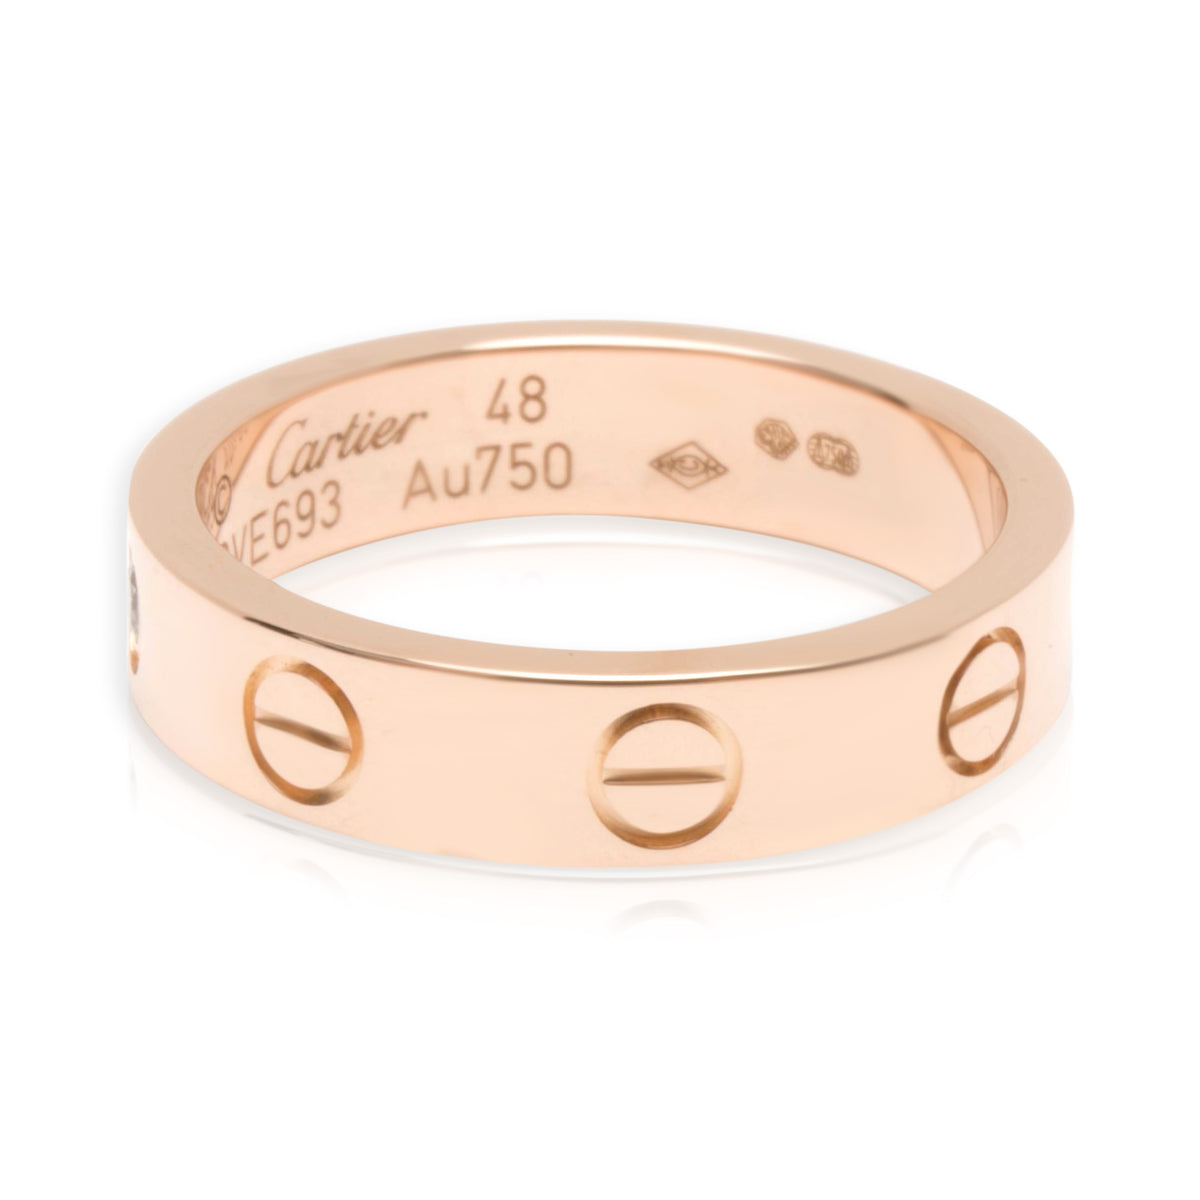 Cartier Love Diamond Wedding Band in 18KT Rose Gold 0.02ct (Size 48)